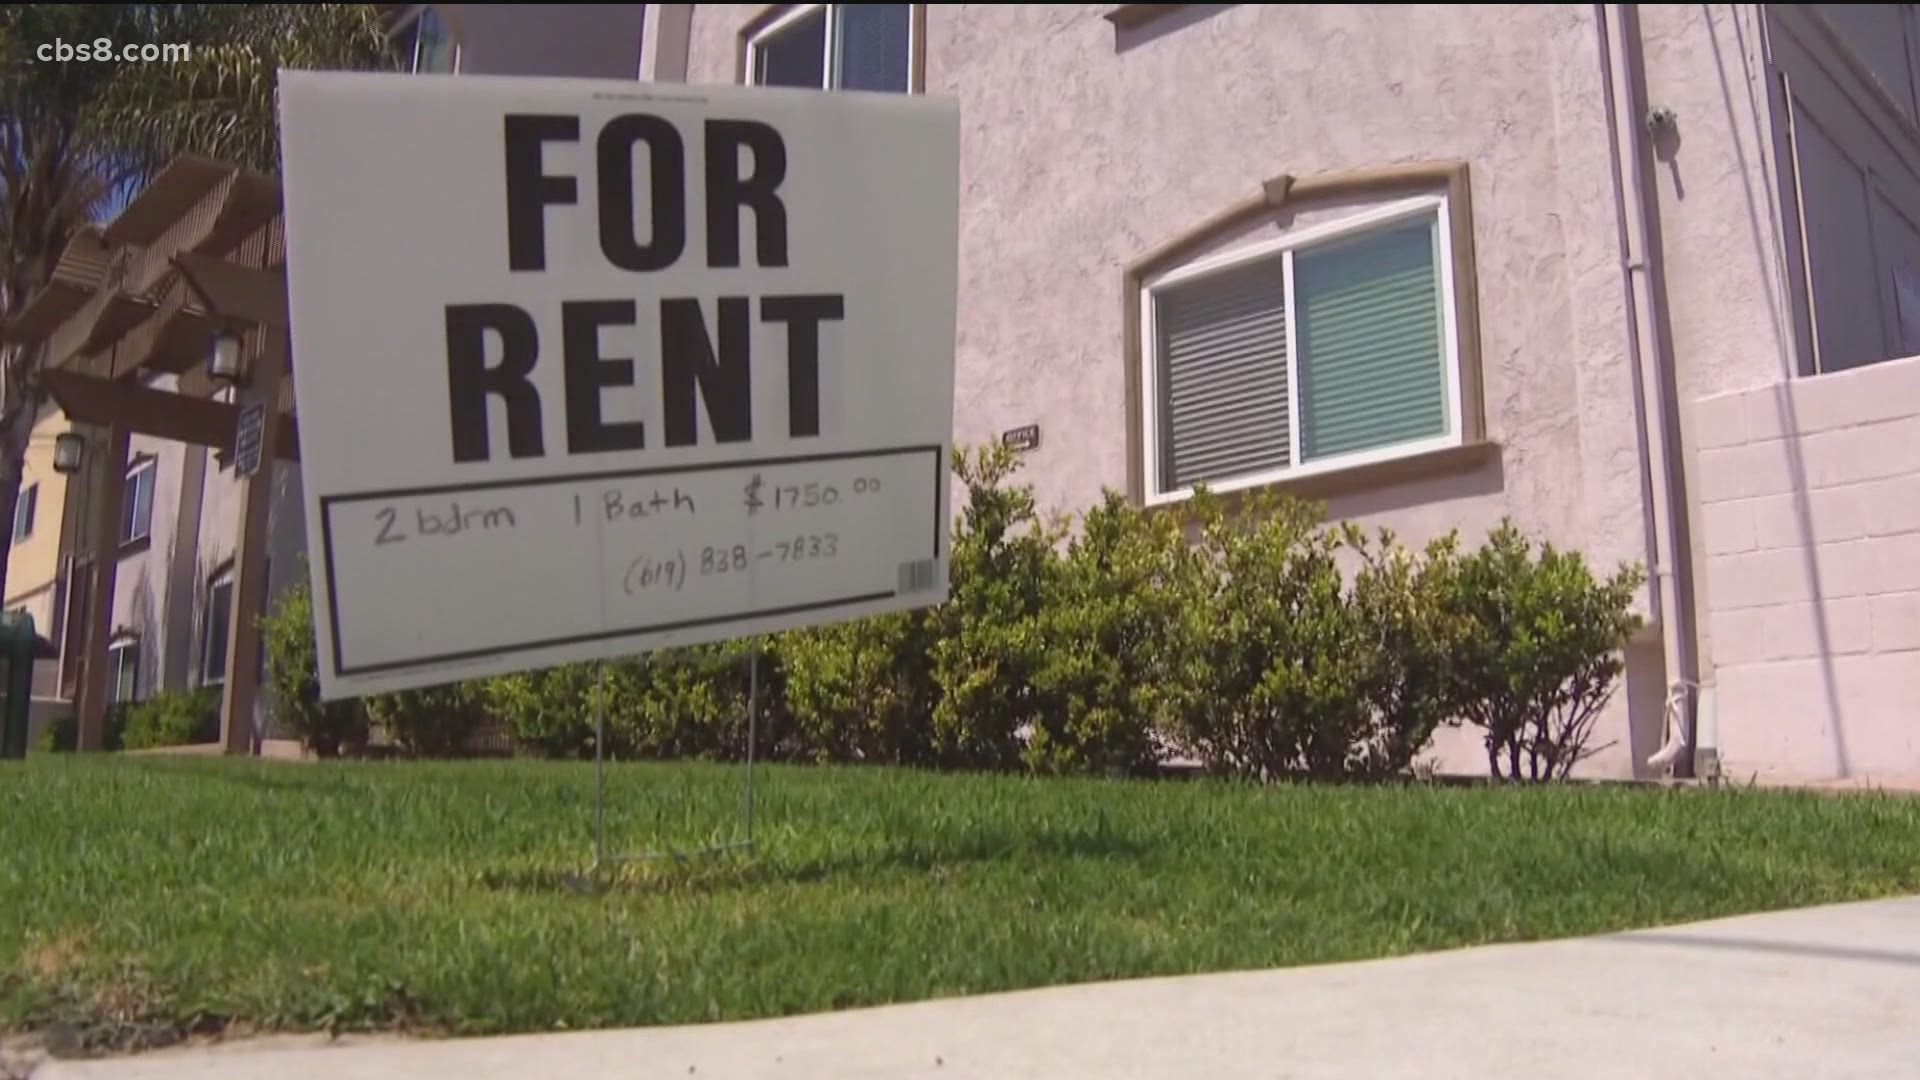 If passed, rent would not be completely forgiven for renters who are behind on payments. Instead, landlords would be paid 80 percent of what is owed from the state.